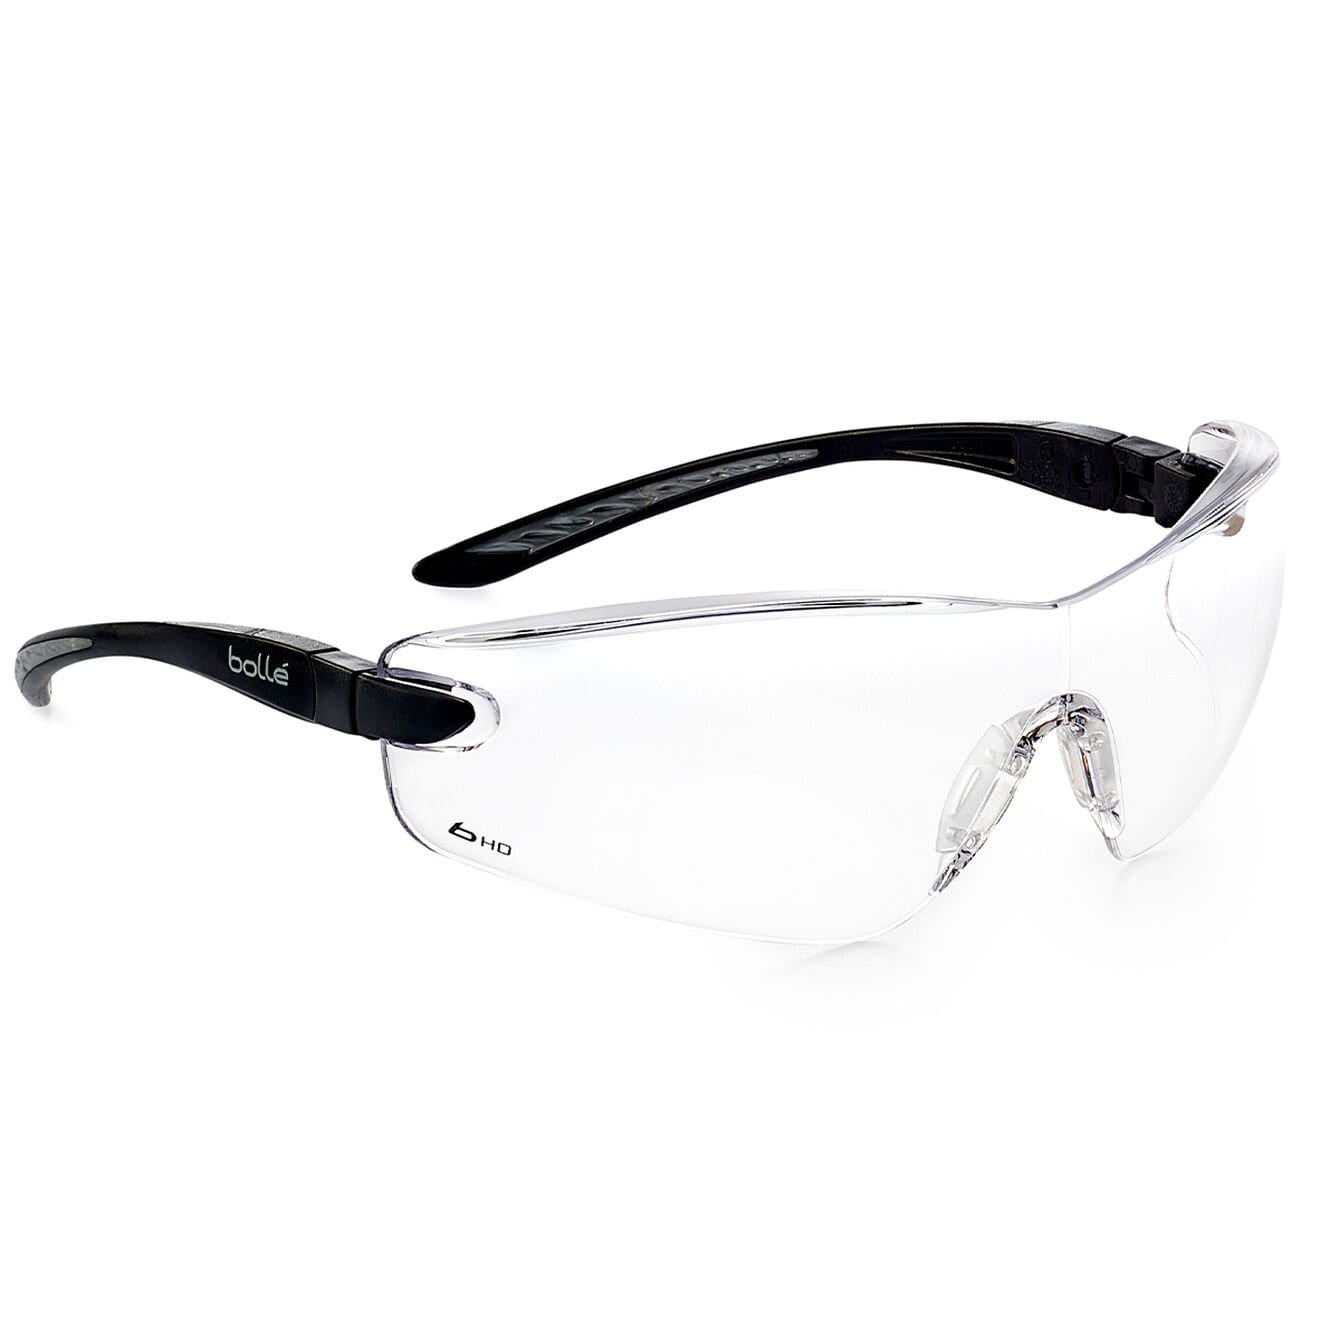 Bolle Cobra Safety Glasses with Black Temples and HD Hydrophobic Anti-Fog Lens